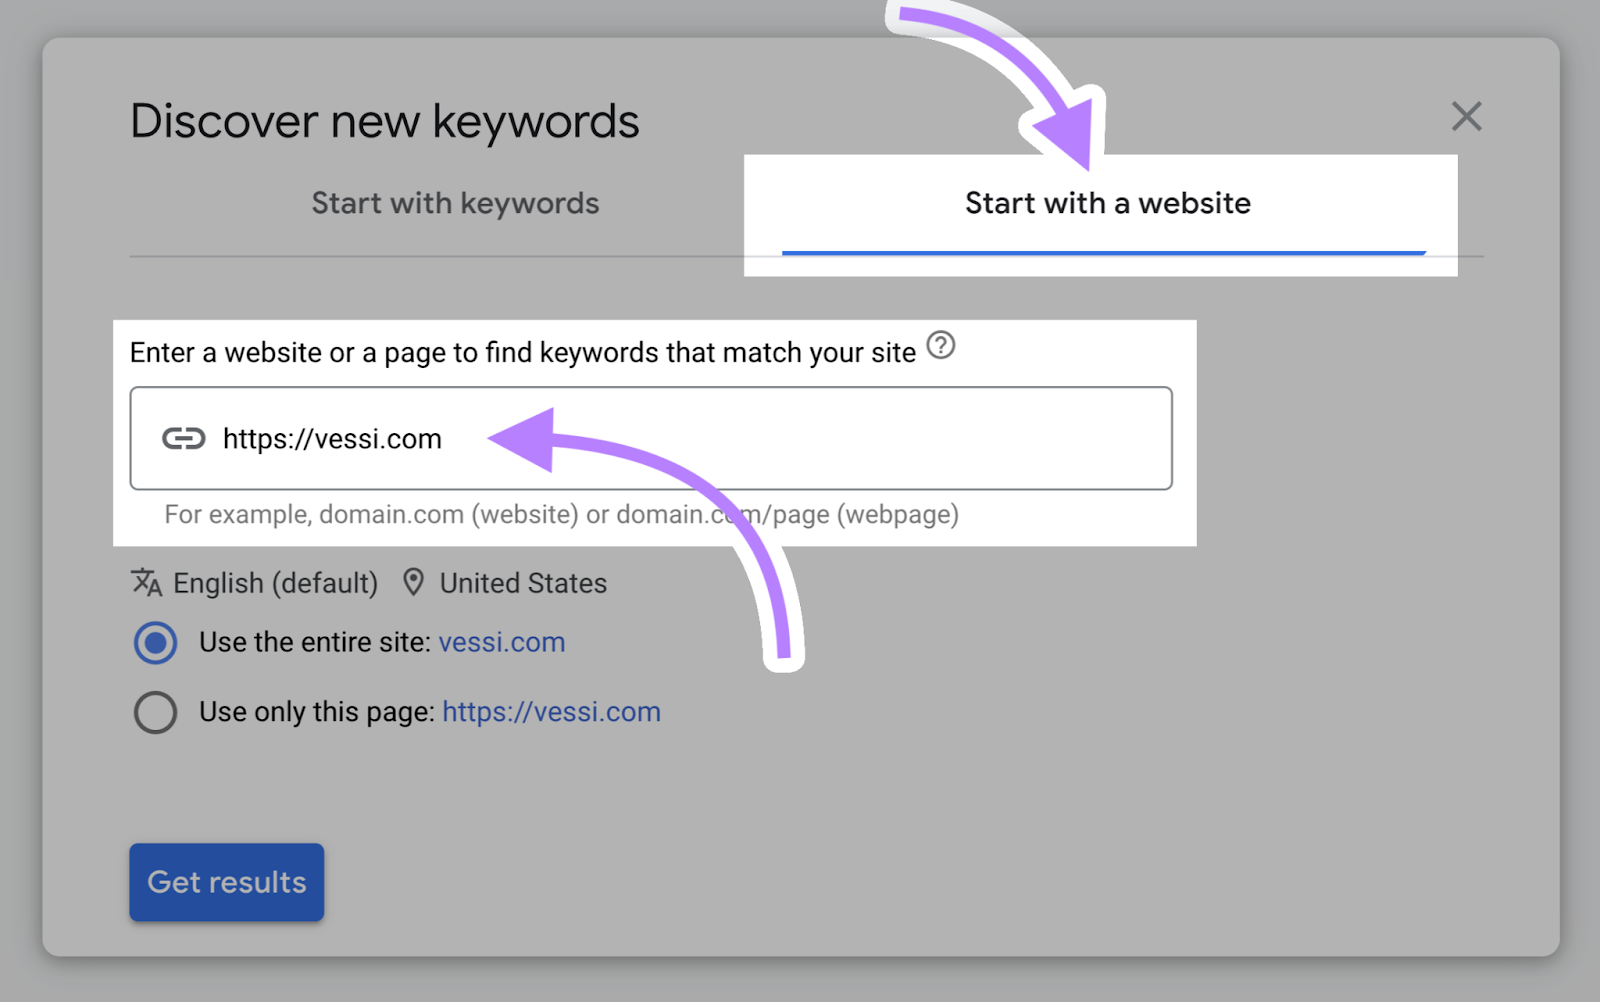 “Start with a website” tab in Keyword Planner